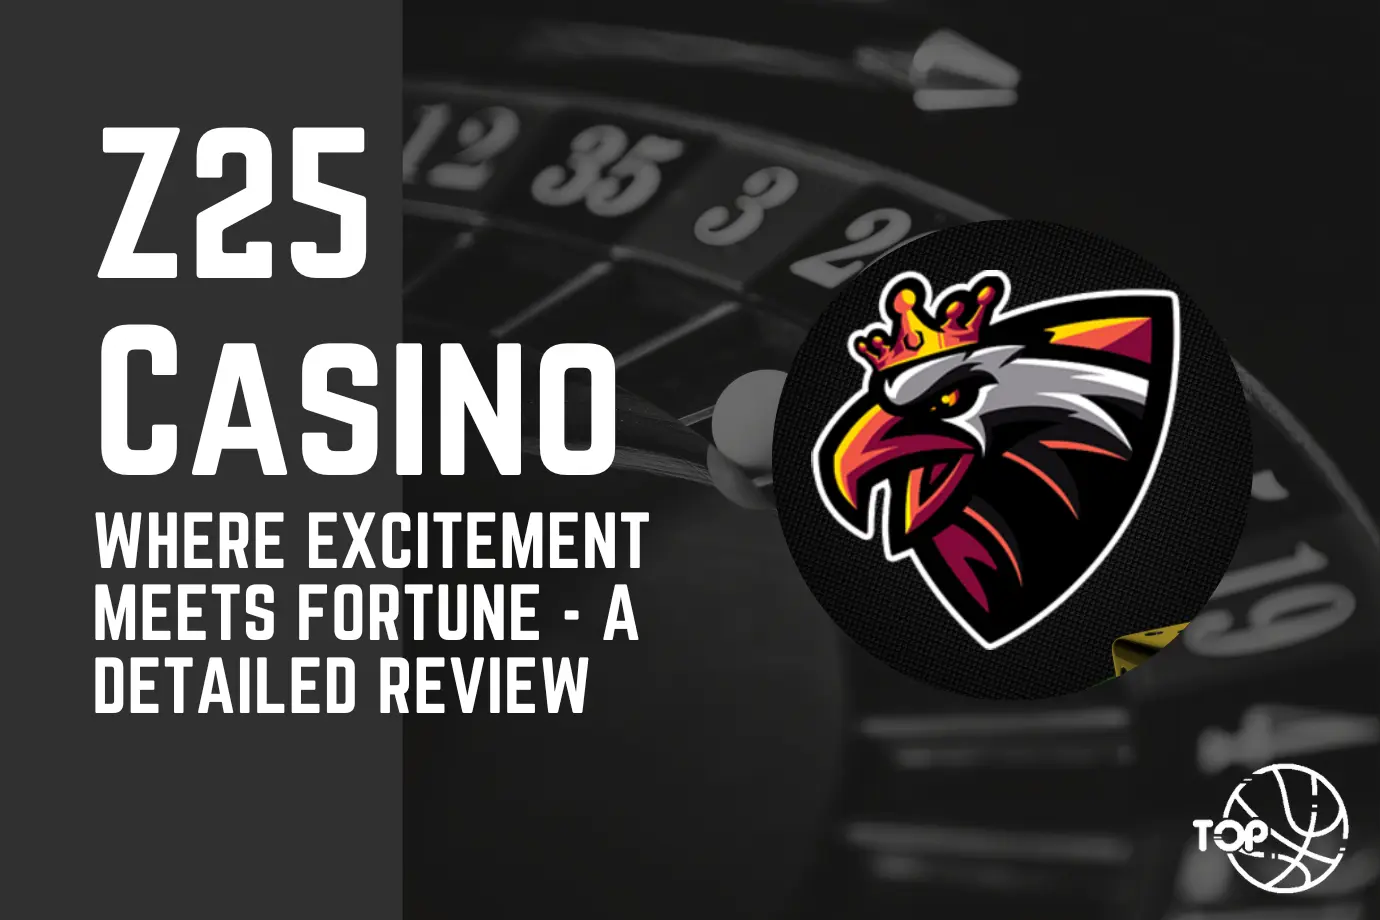 Z25 Casino: Where Excitement Meets Fortune - A Detailed Review